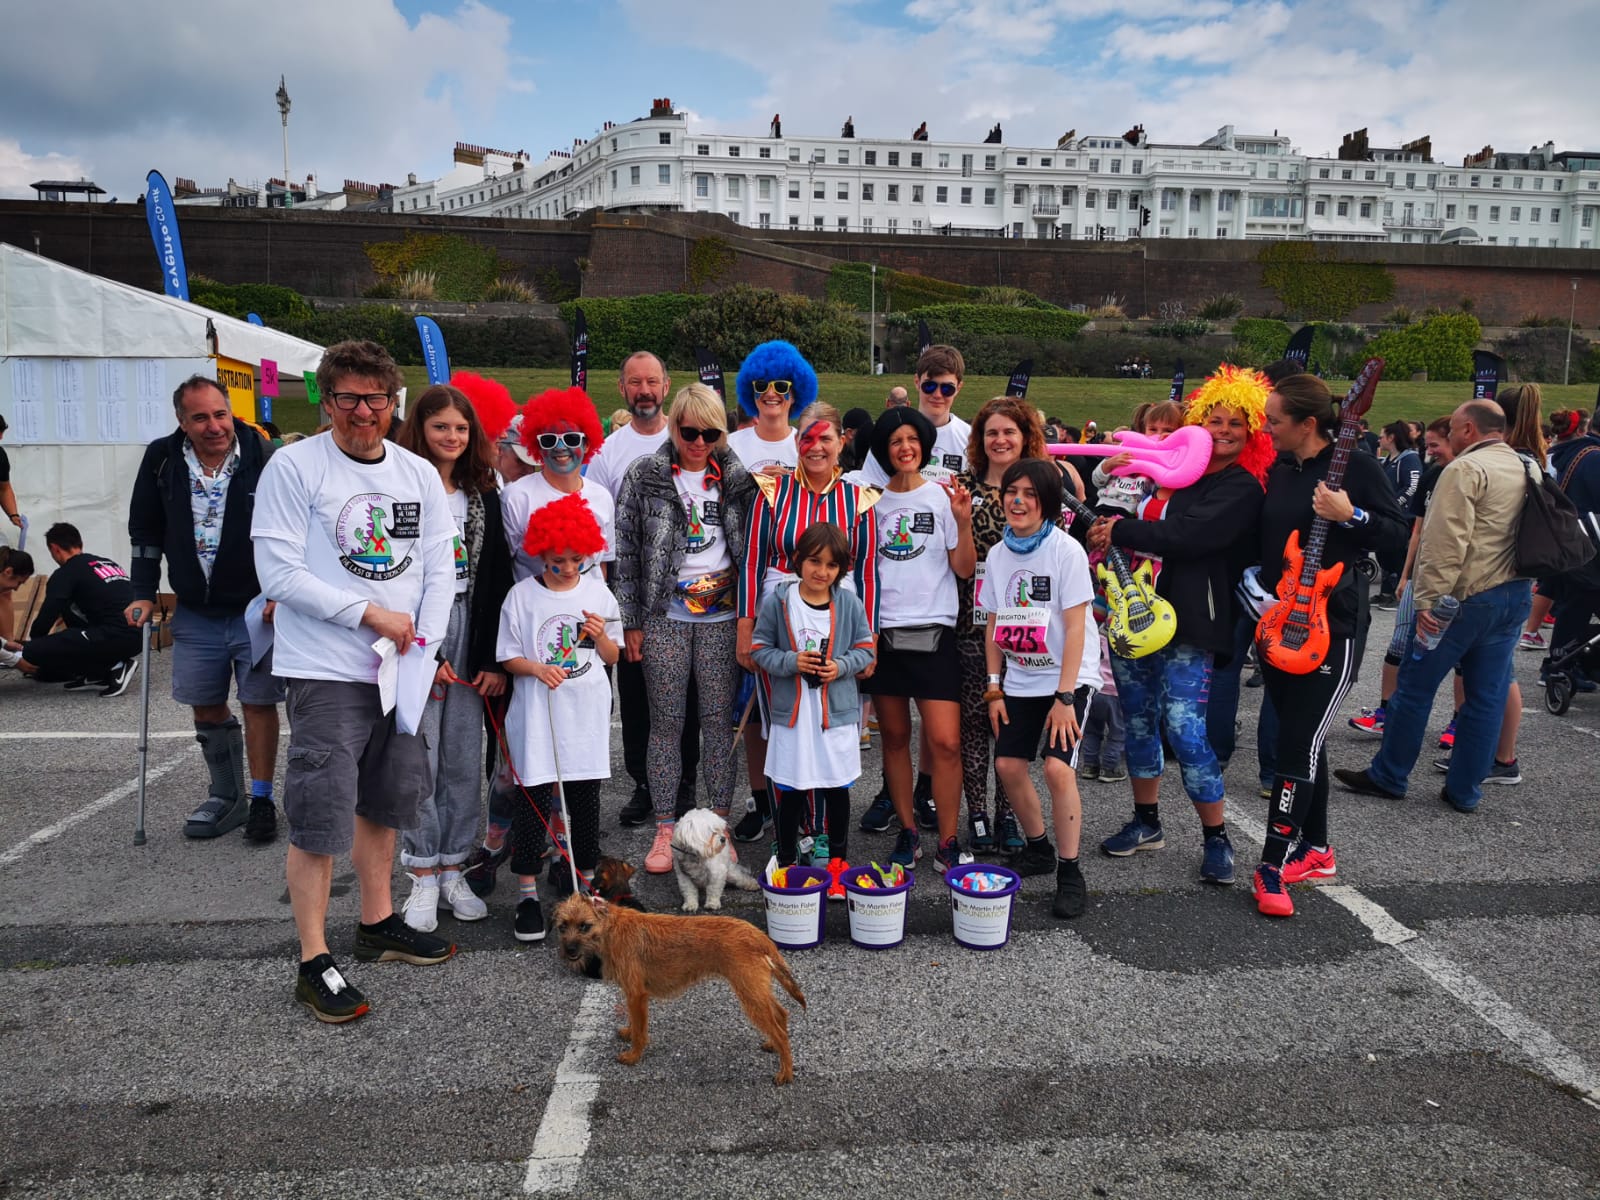 The Martin Fisher Foundation fundraise at the Run2music Event Brighton 11th May 2019.